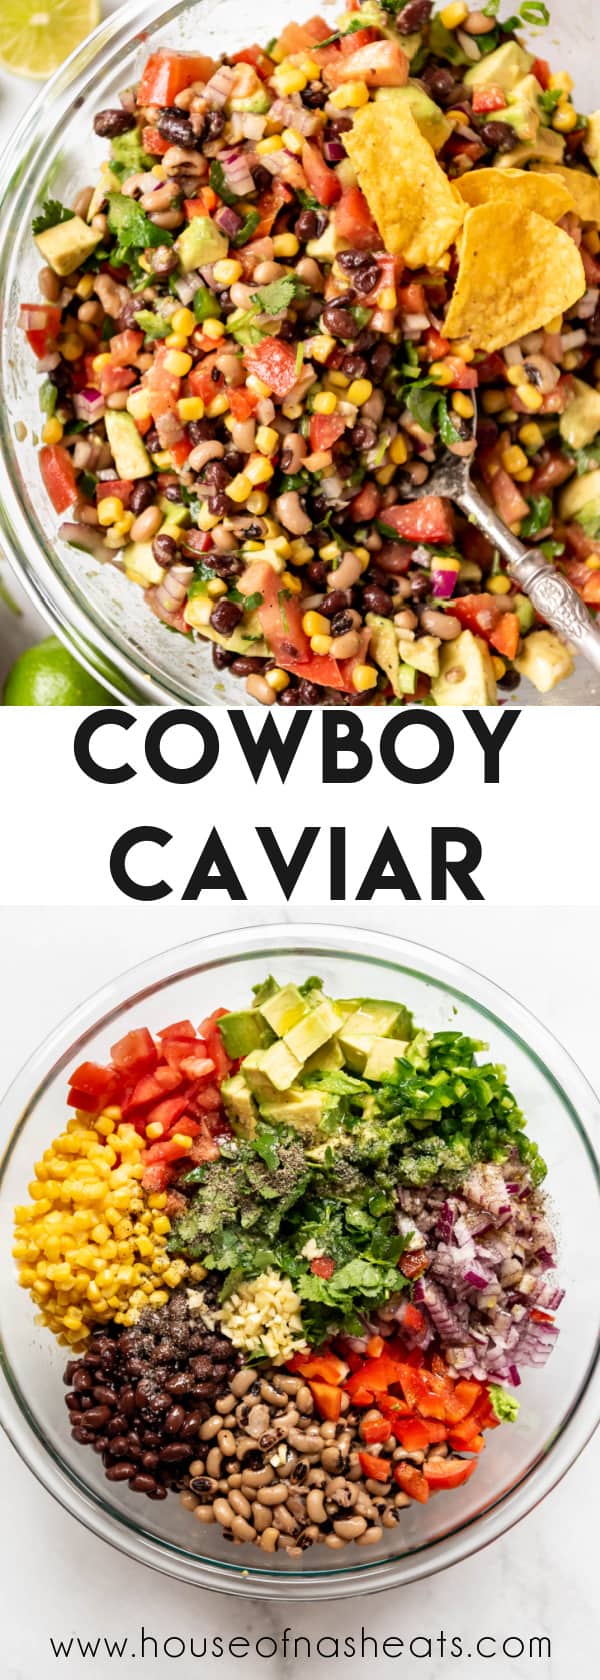 A collage of images of cowboy caviar with text overlay.